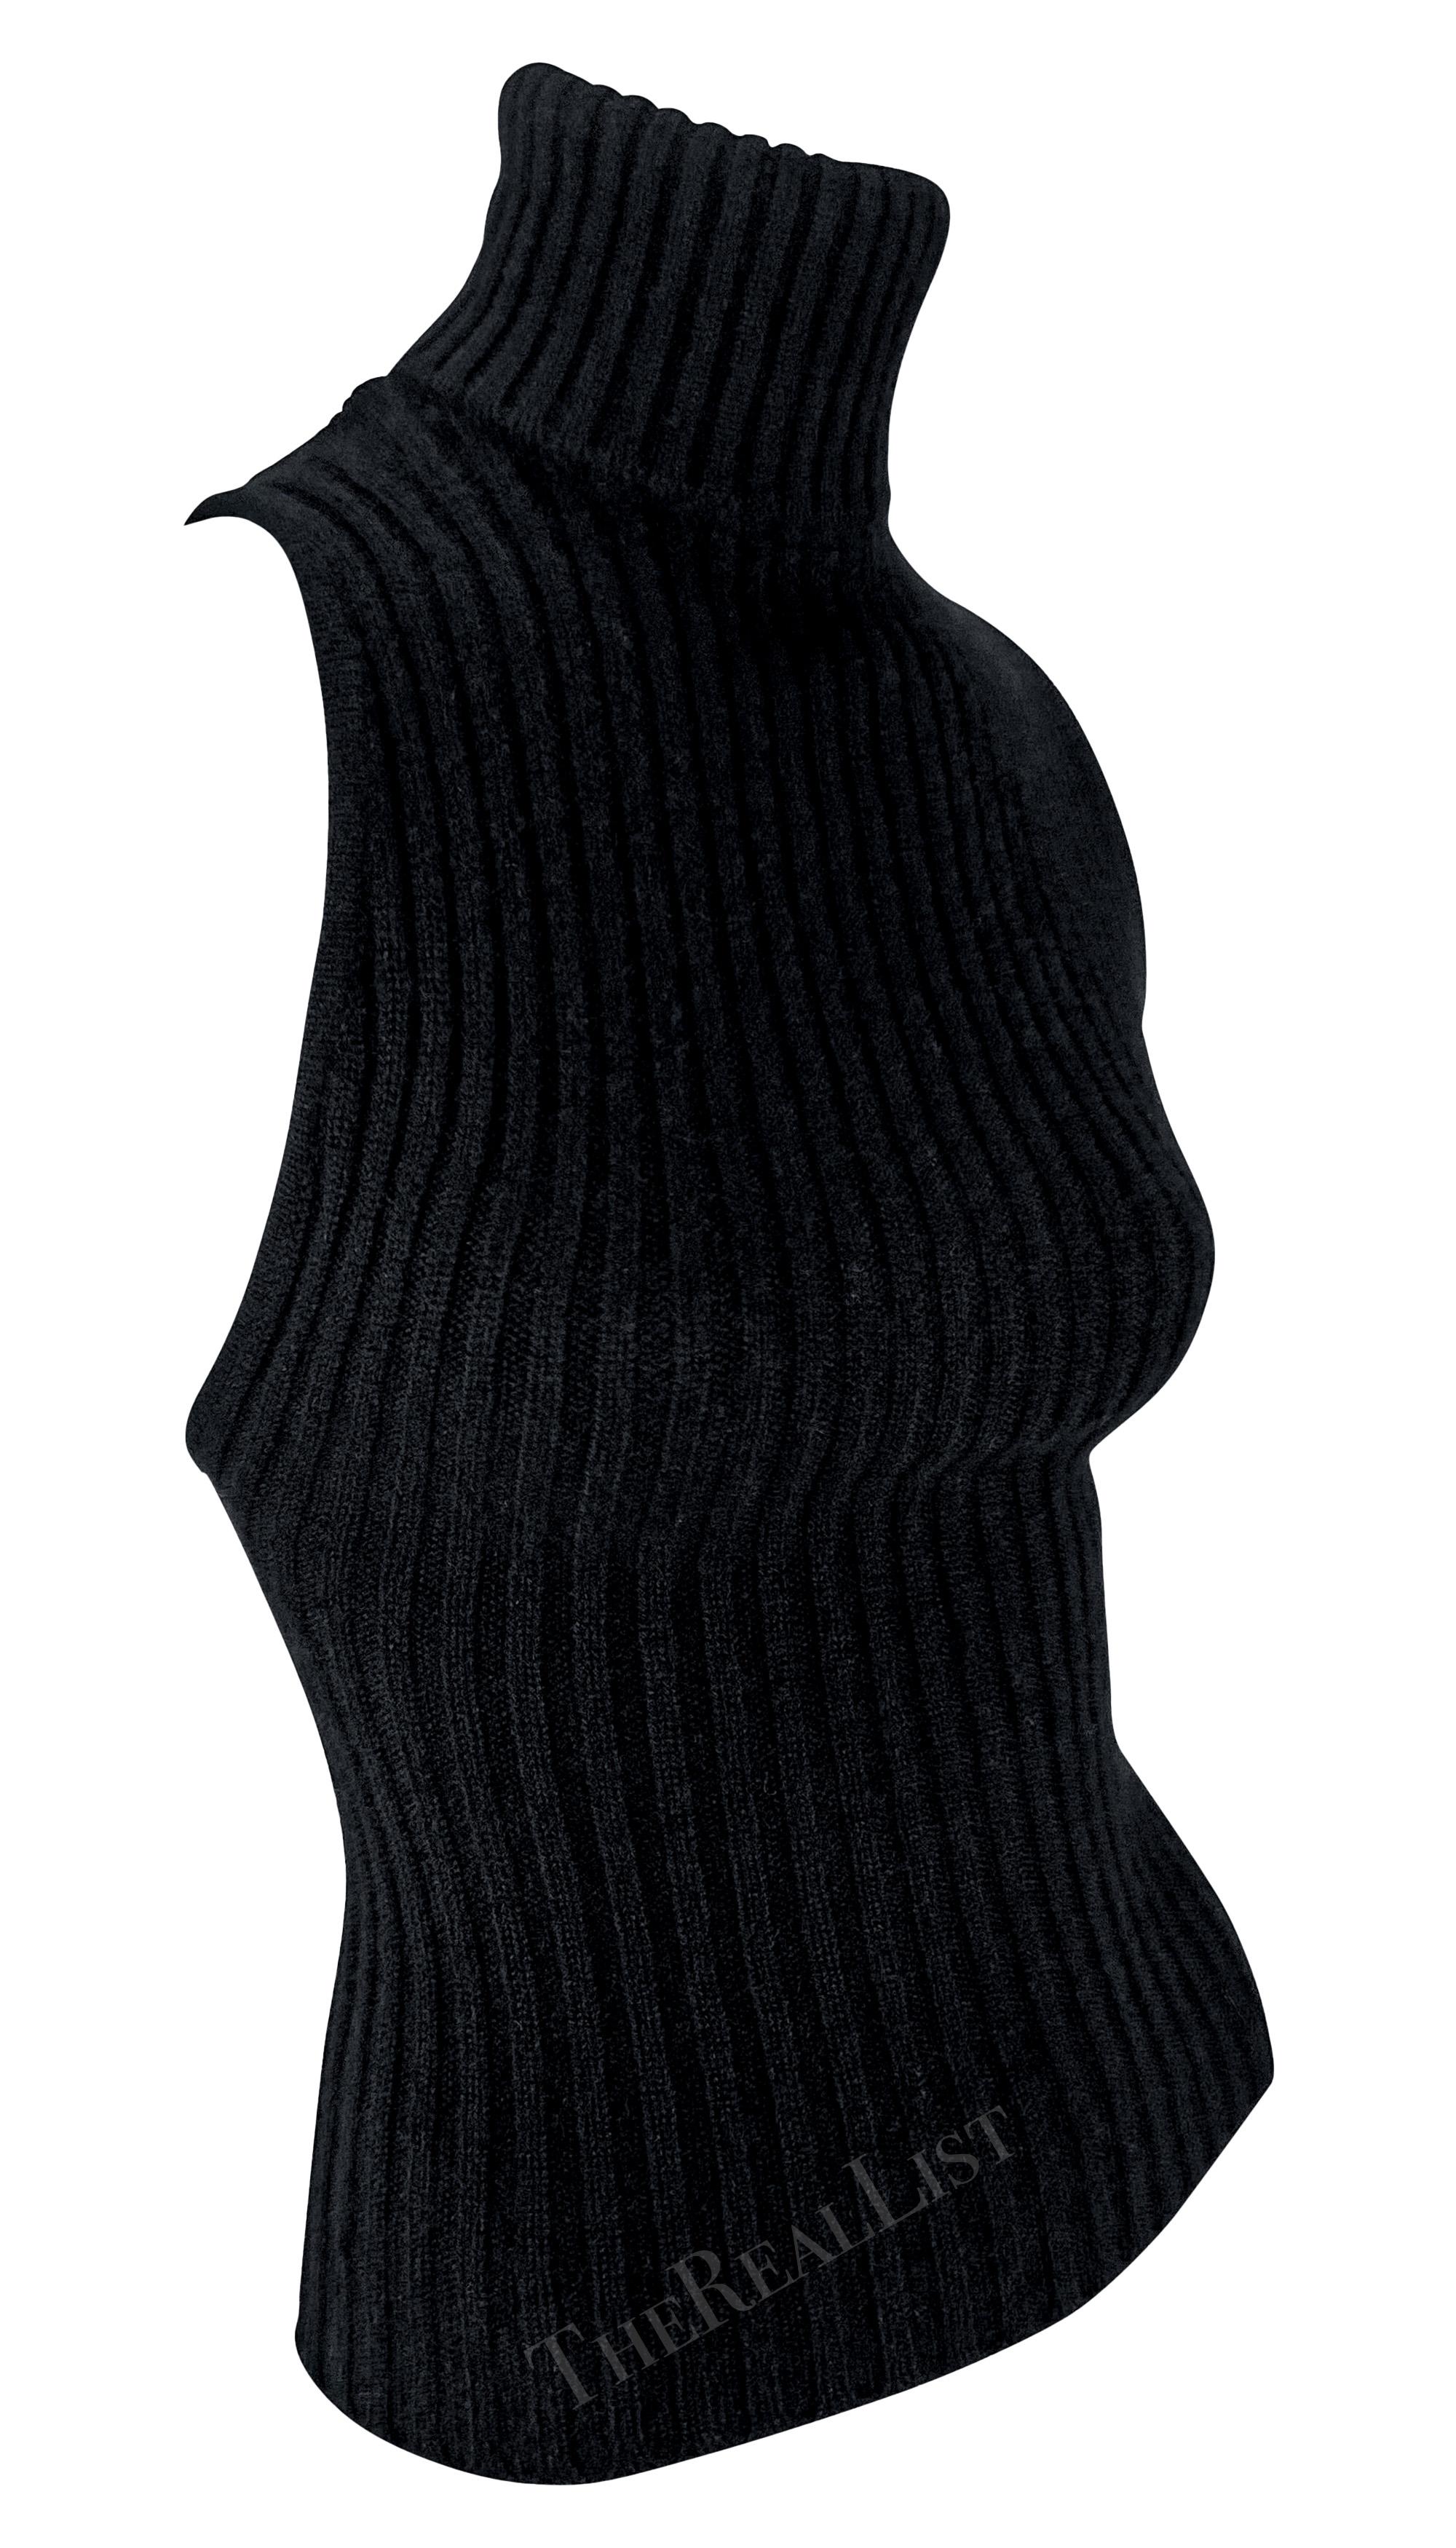 Late 1990s Gucci by Tom Ford Black Cashmere Backless Turtleneck Top 2